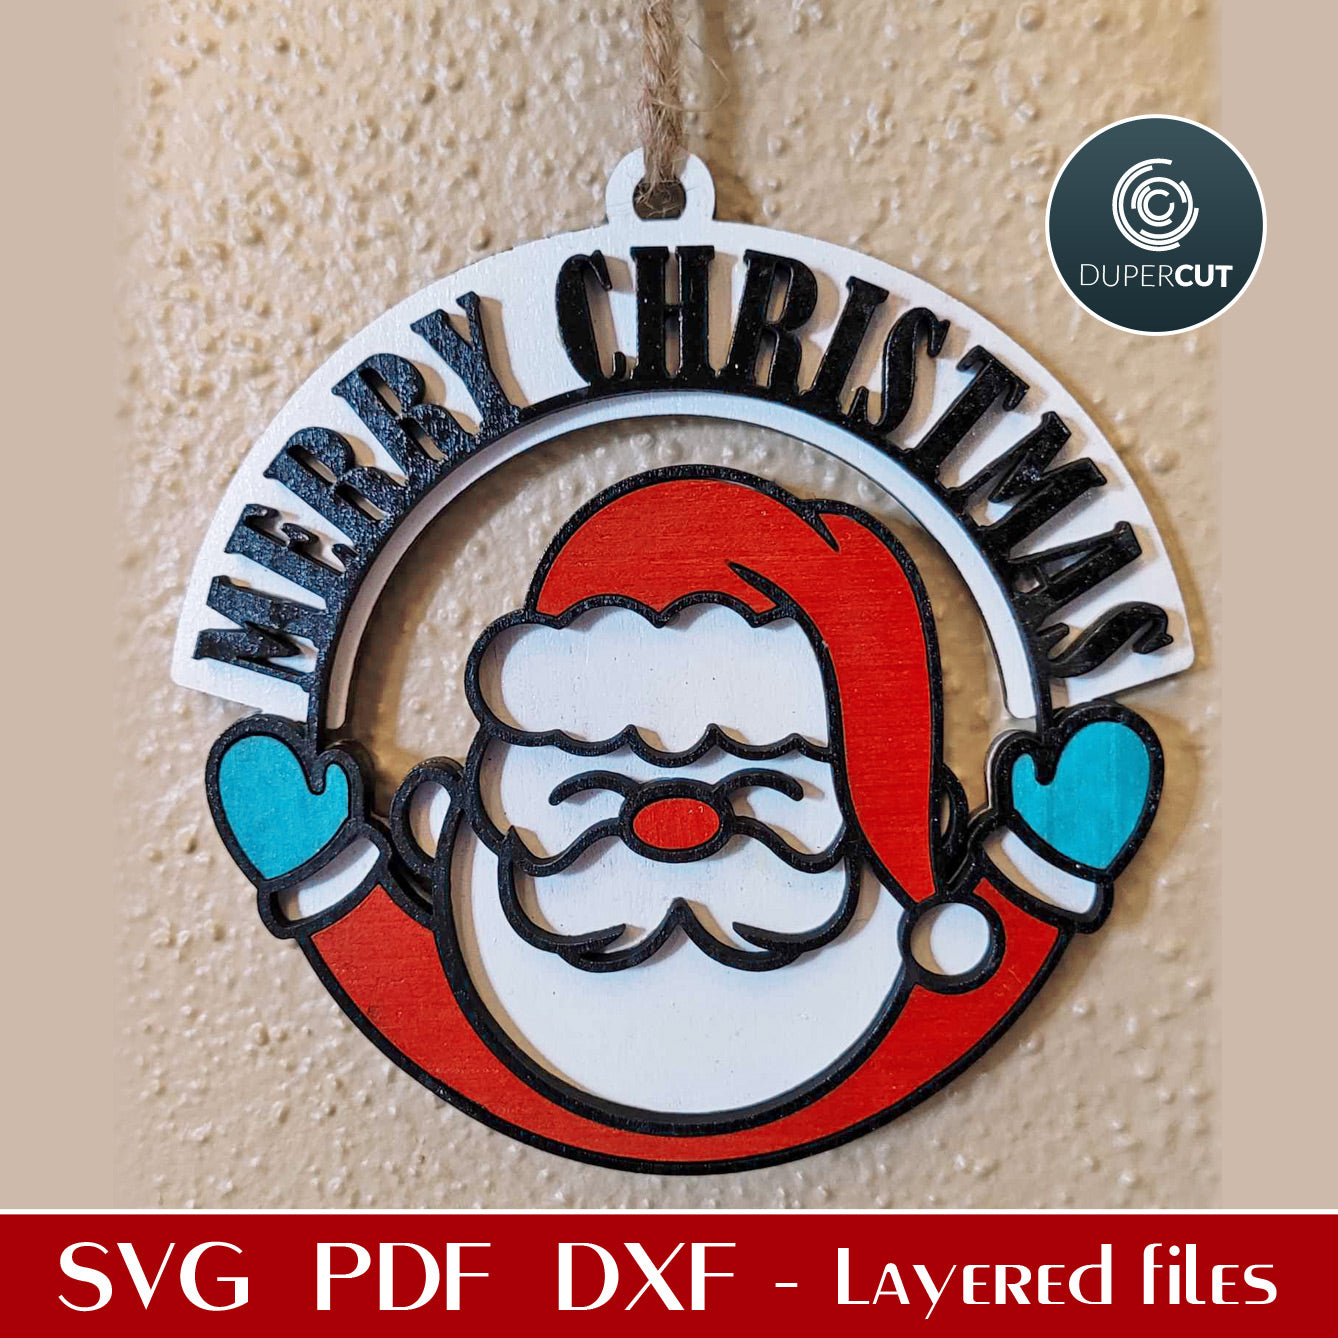 Merry Christmas Santa ornament template - SVG DXF layered vector cutting files for Glowforge, Cricut, Silhouette, CNC plasma by DuperCut